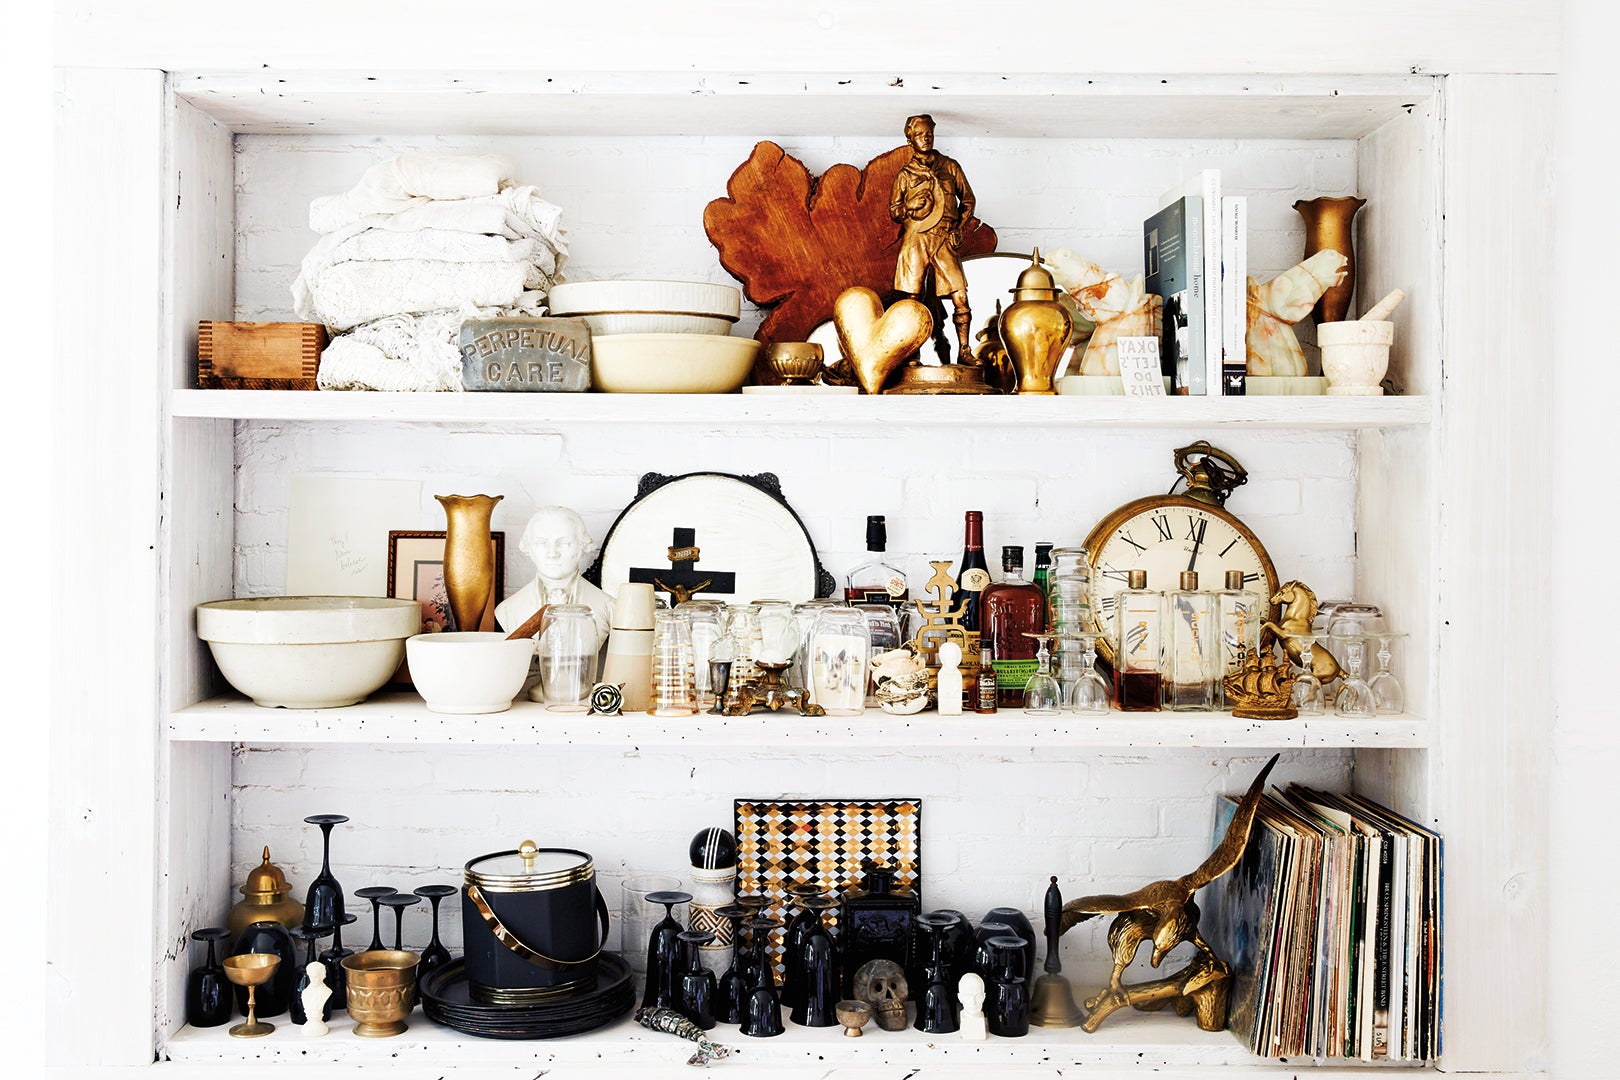 Shelves with kitchen items and trinkets